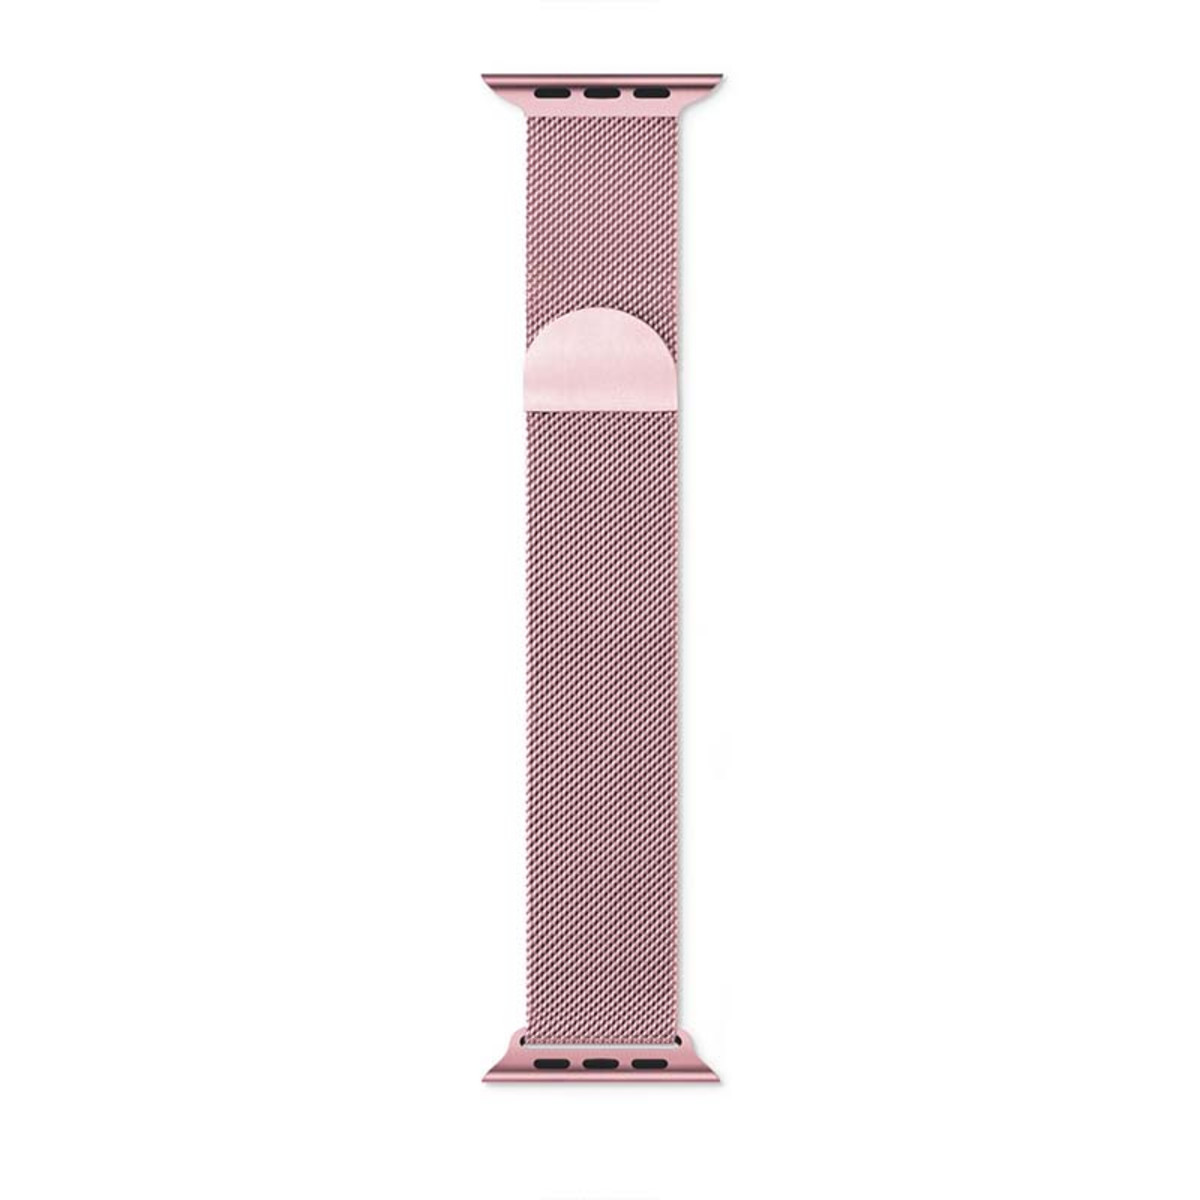 Mesh Band Apple Watch 42/44mm Rose Gold